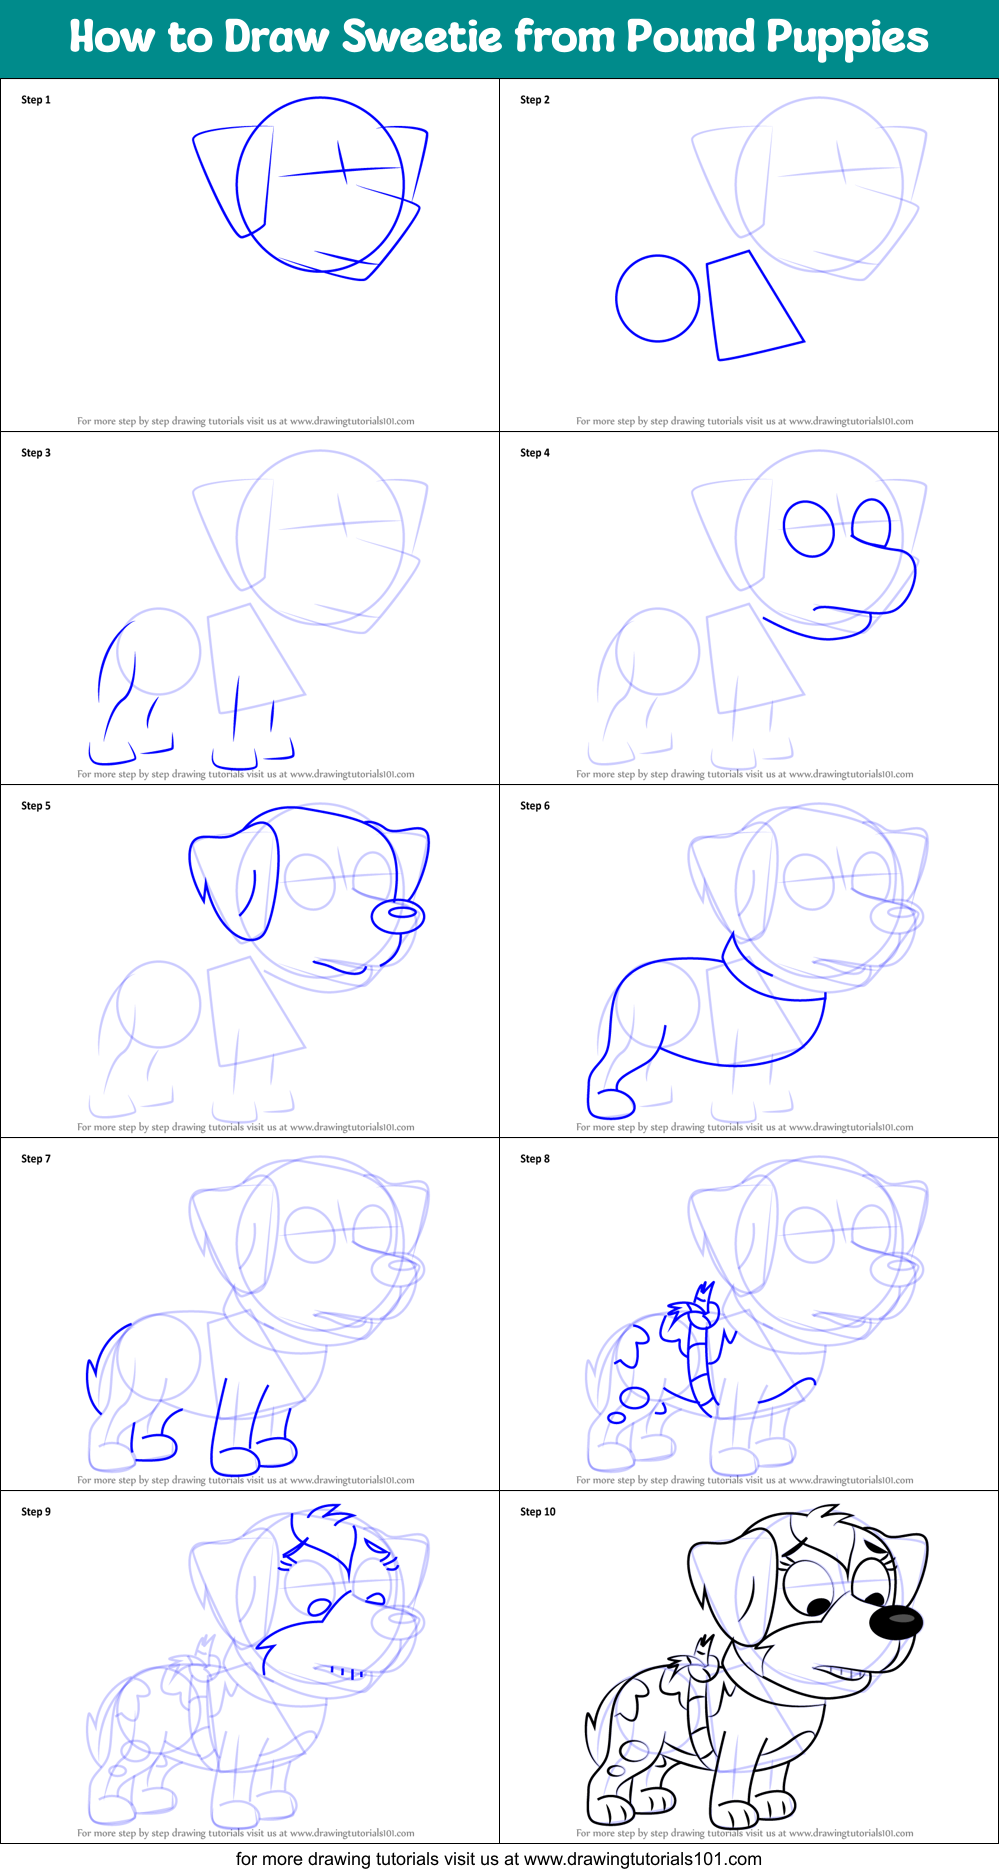 How to Draw Sweetie from Pound Puppies (Pound Puppies) Step by Step ...